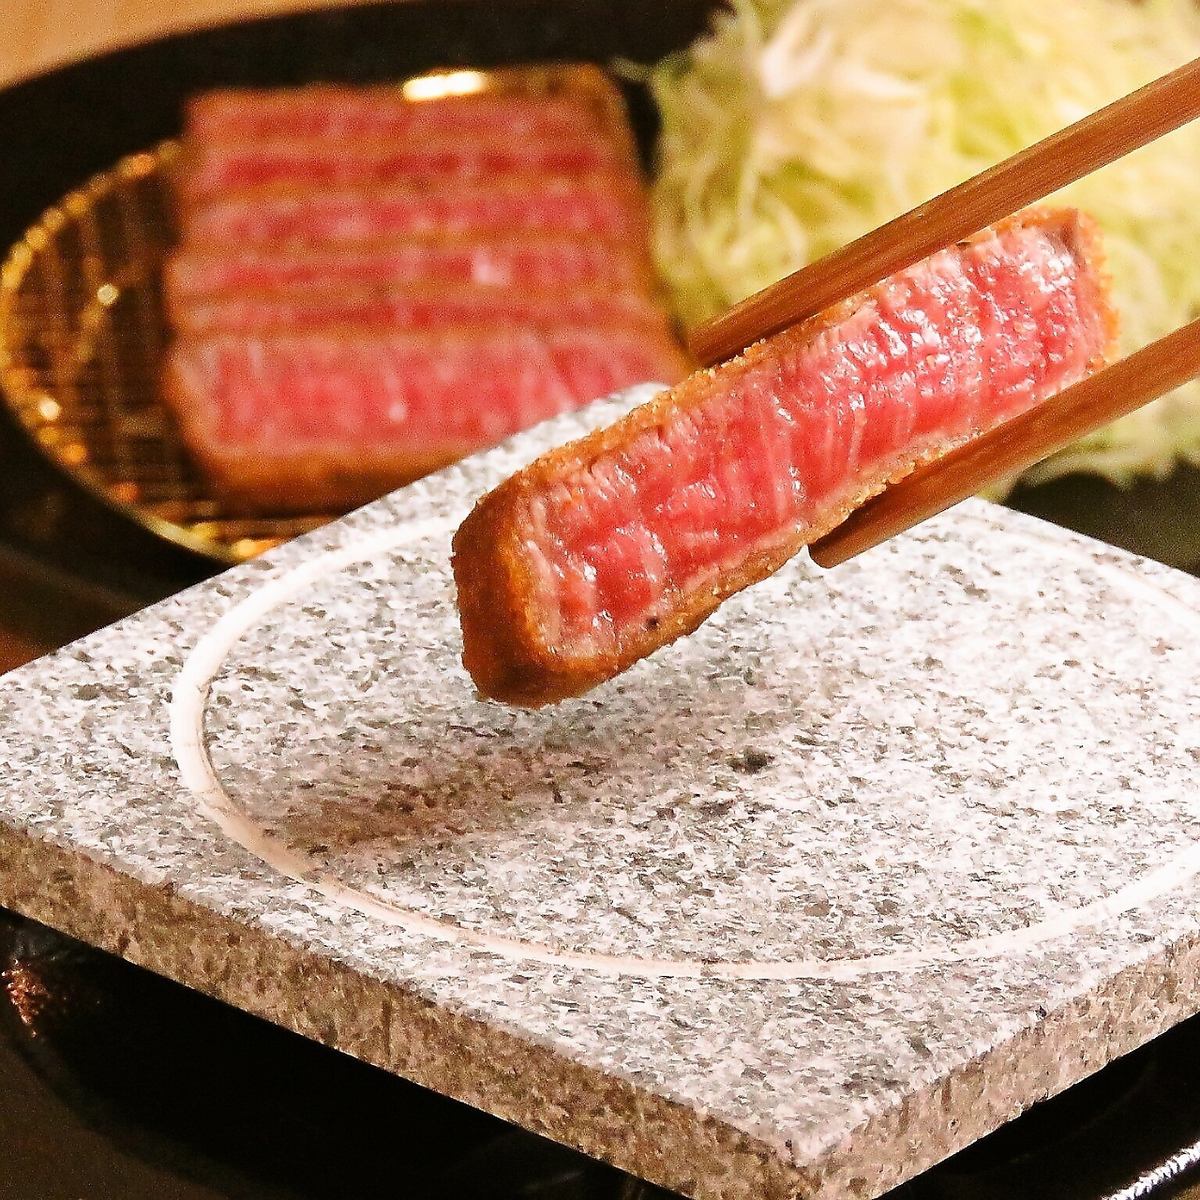 ★Beef cutlet lunch on Wakakusa Street! Beef cutlet "Nakazaki" baked on a stone plate in front of you★